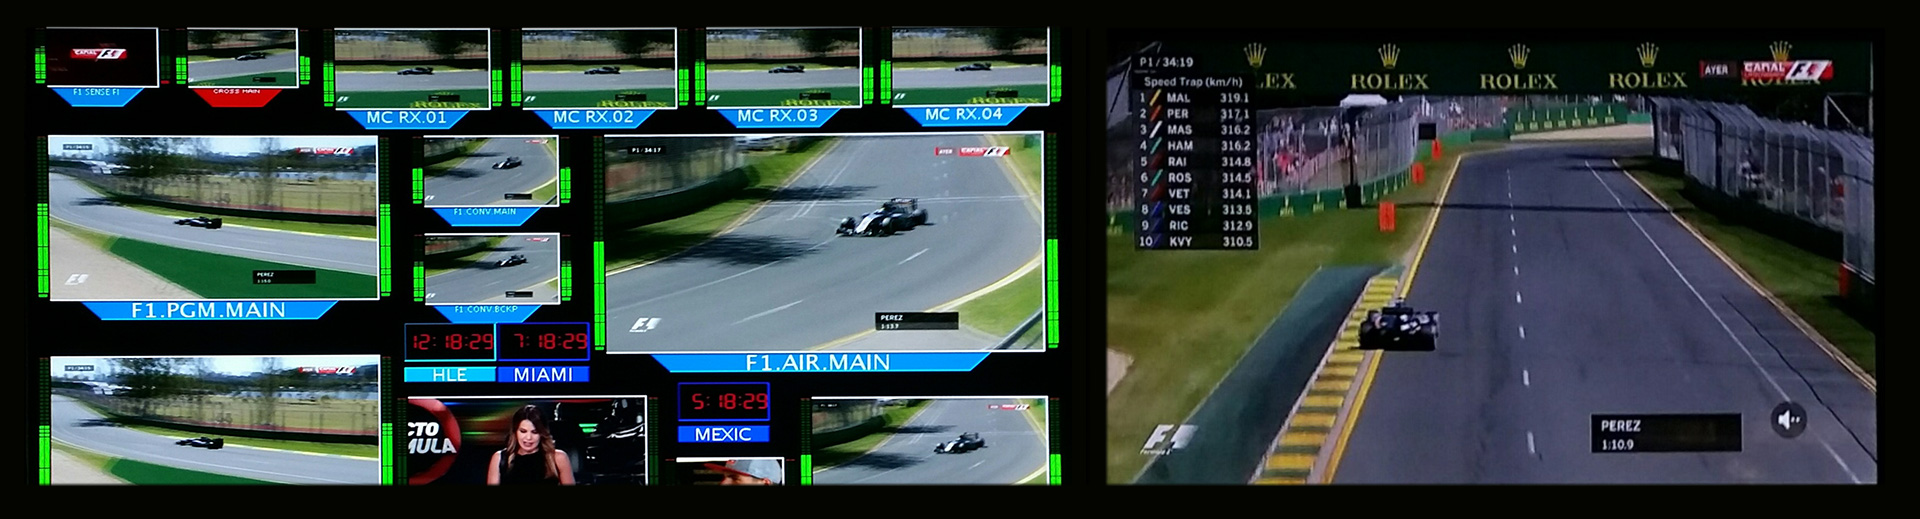 Mediapro uses EVS solutions to increase the production capacity of its new F1 channel